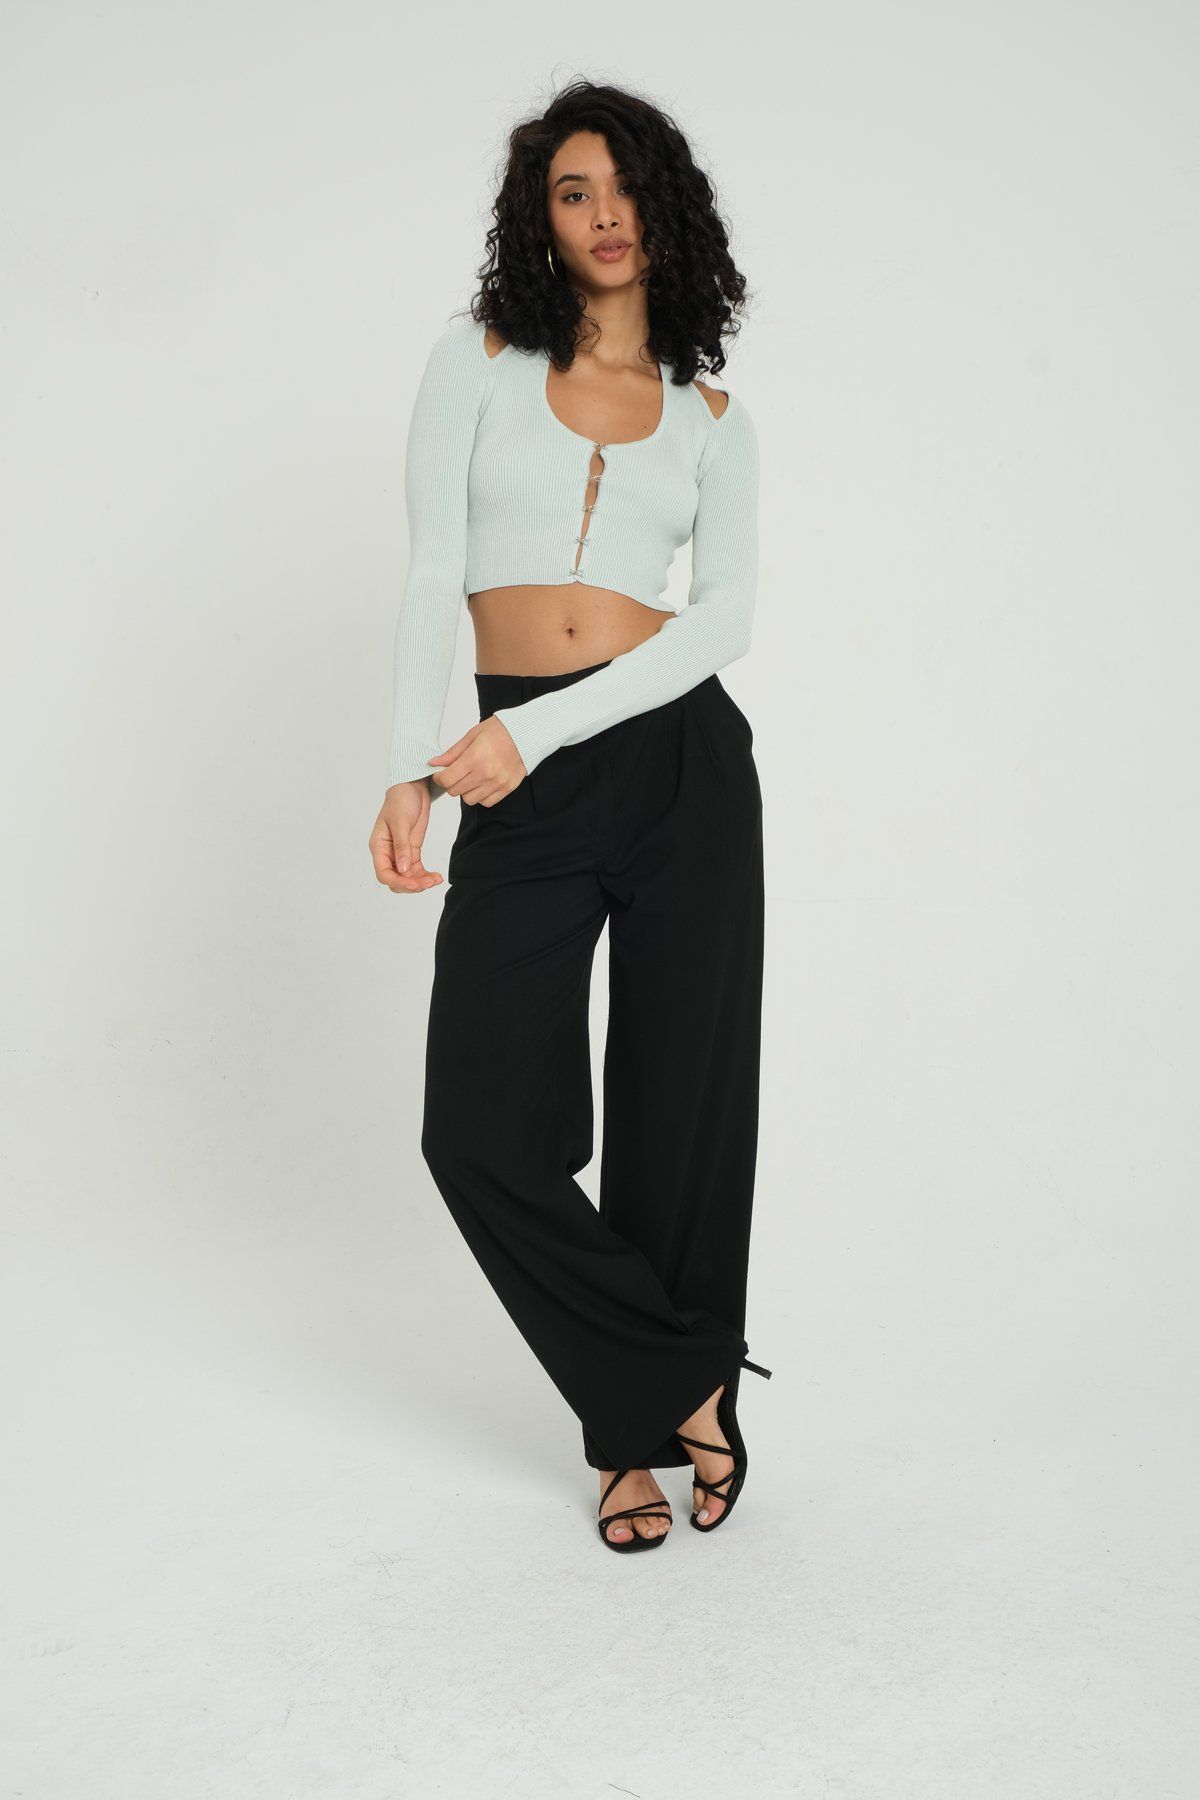 Scoop Neck Accessorized Cropped Cardigan with a Back Cut out